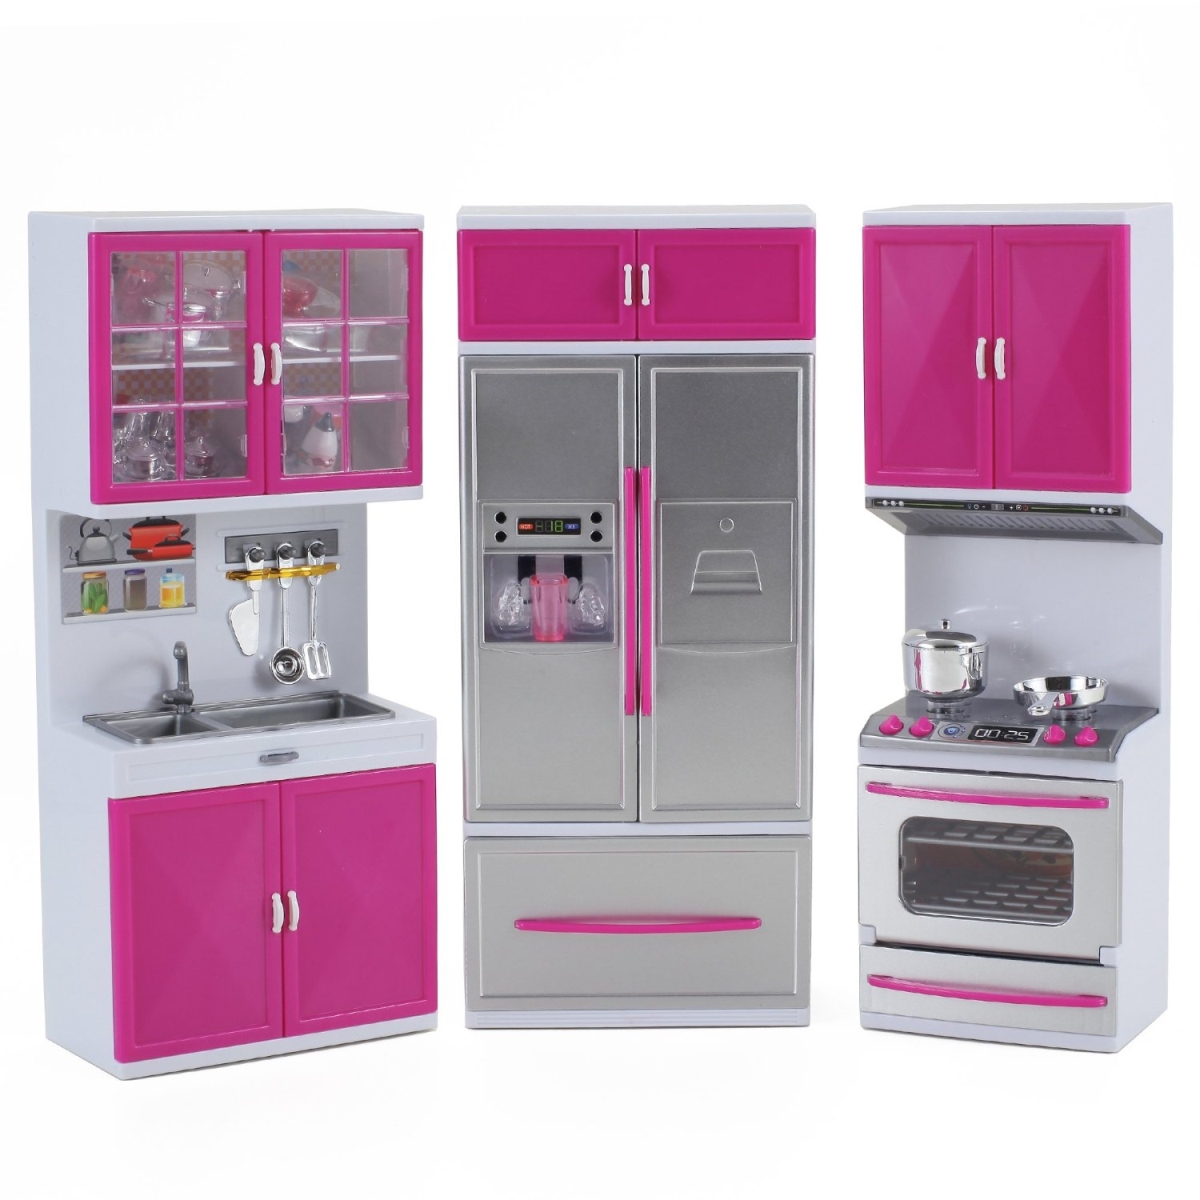 Picture of AZ Trading NC33155-AZ My Modern Full Deluxe Battery Operated Kitchen Playset - Refrigerator Stove Sink